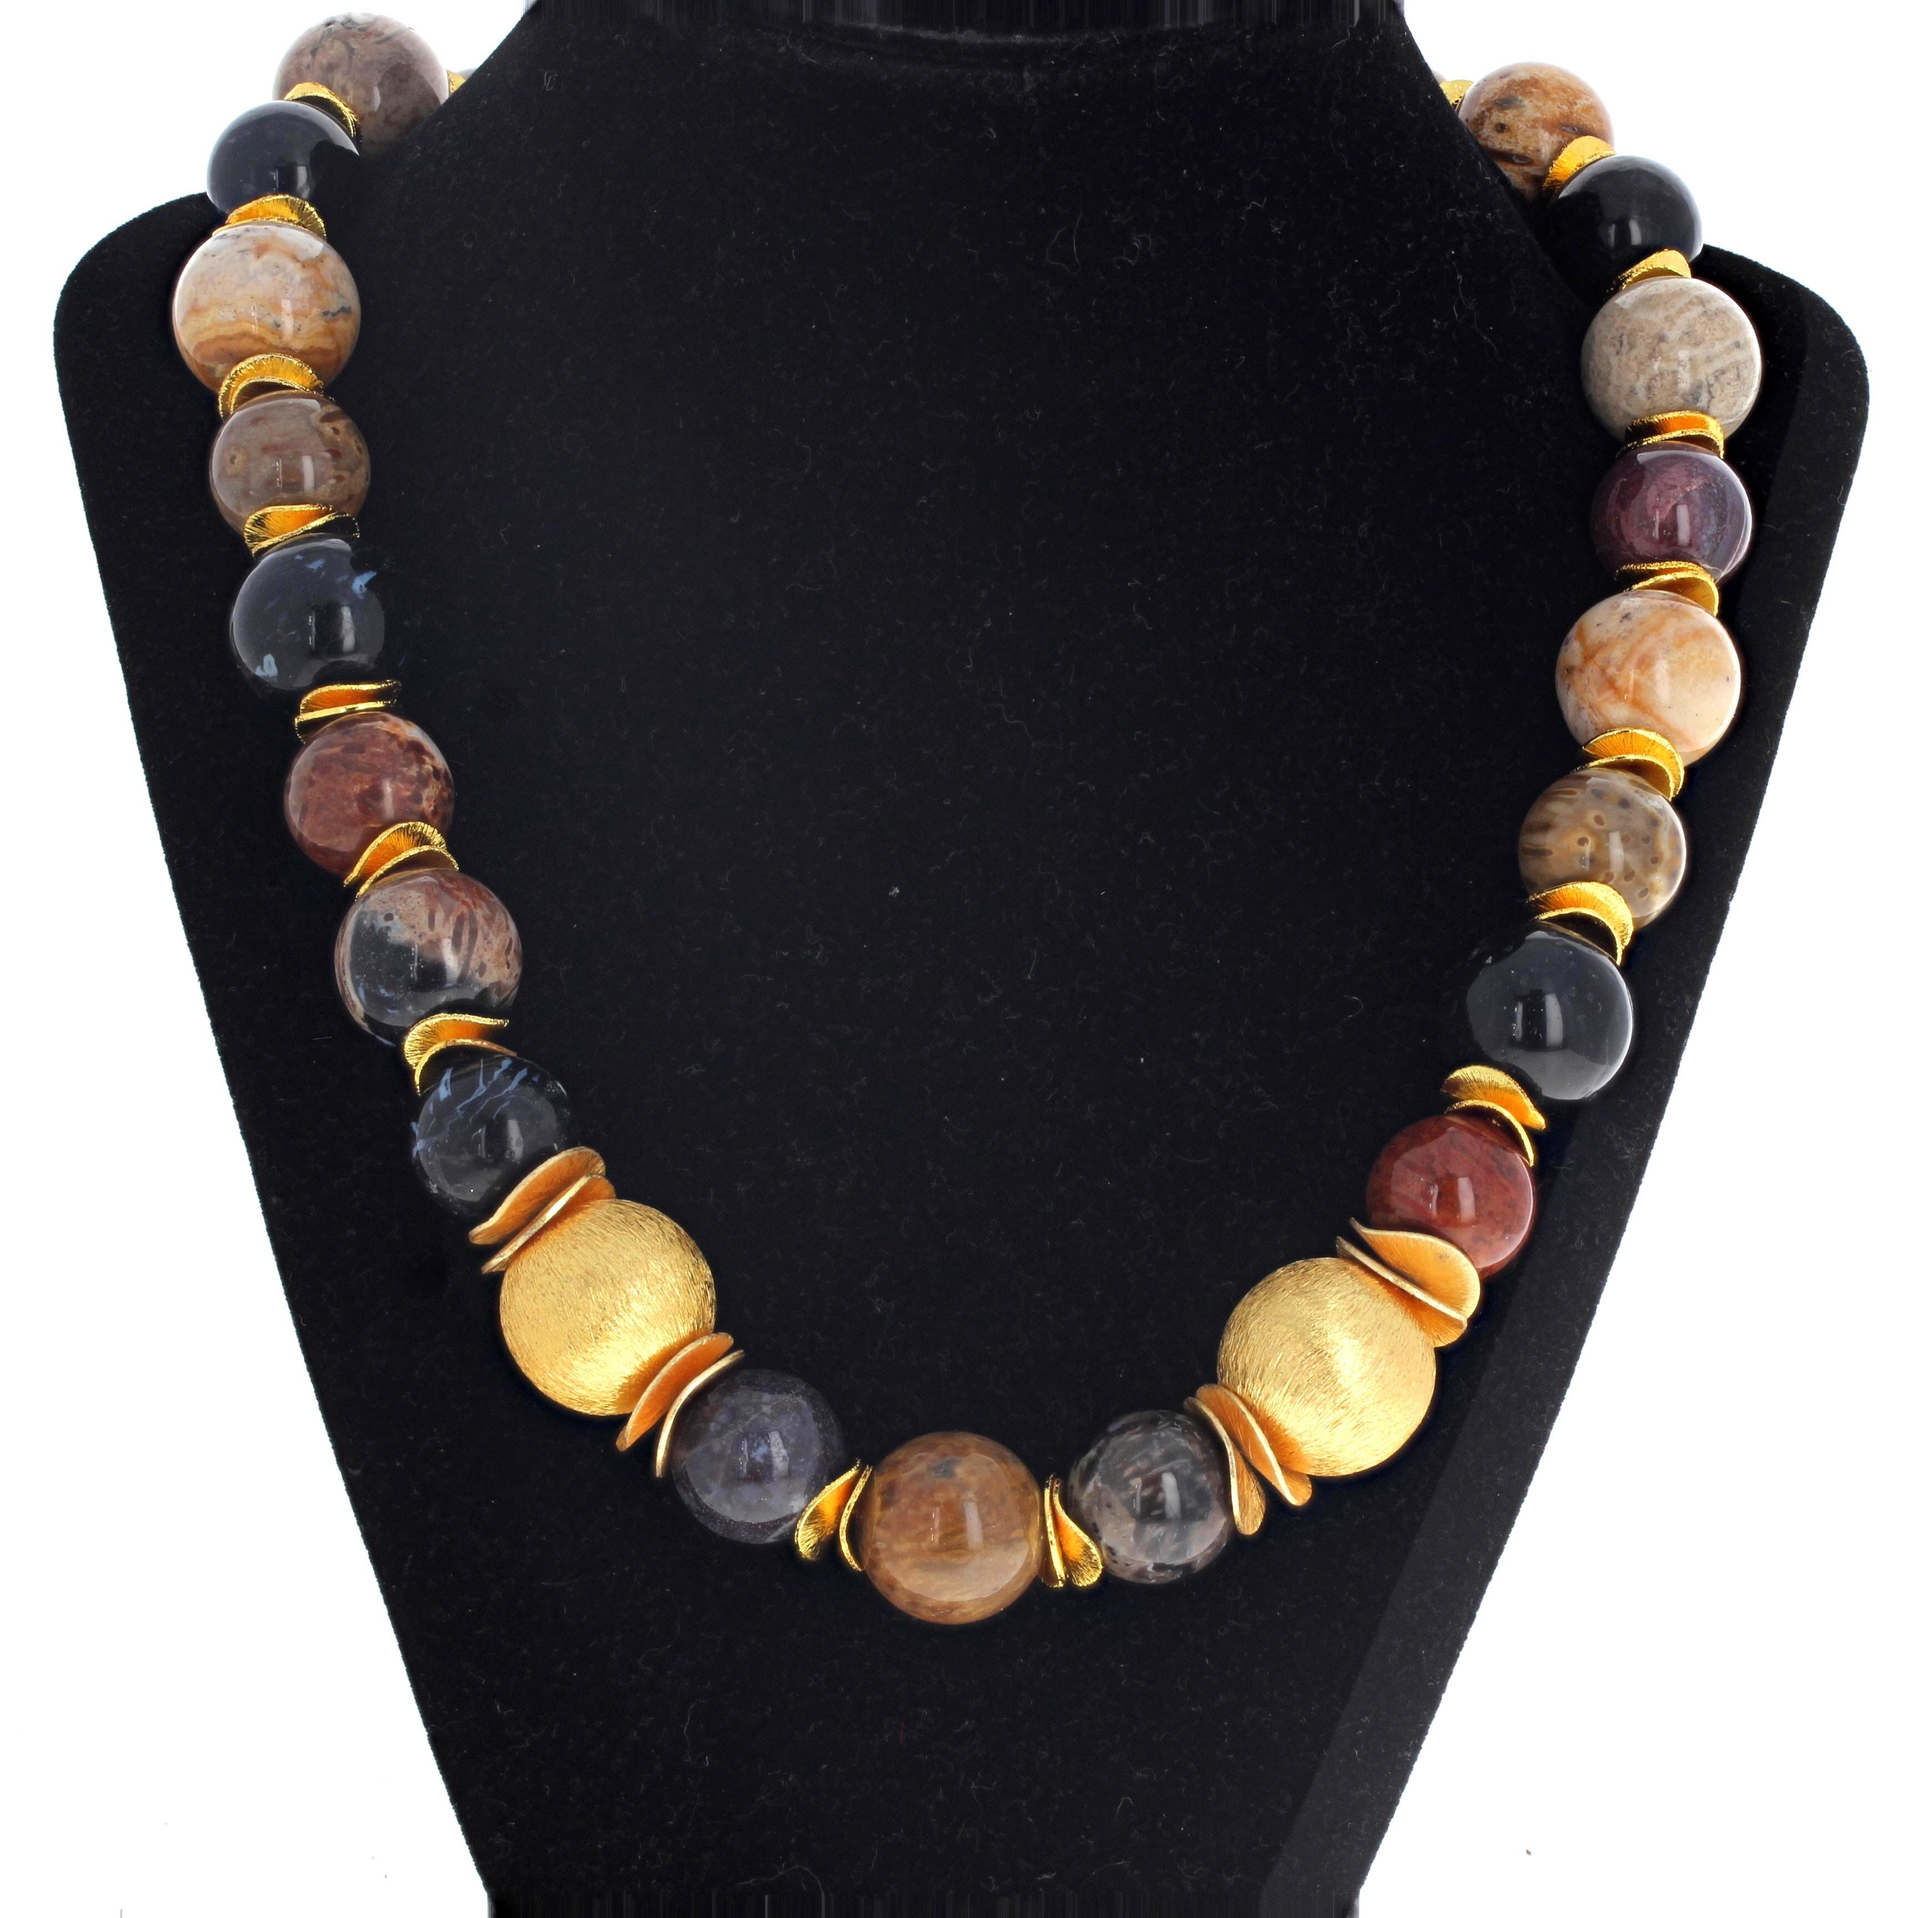 Fascinating petrified Palm Tree Rondels form this beautiful 20 inch long necklace.  The large gold plated rondels are 20mm and the larger Petrified Palm Tree rondels are approximately 18mm.  The beautiful spacers are gold plated as is the easy to